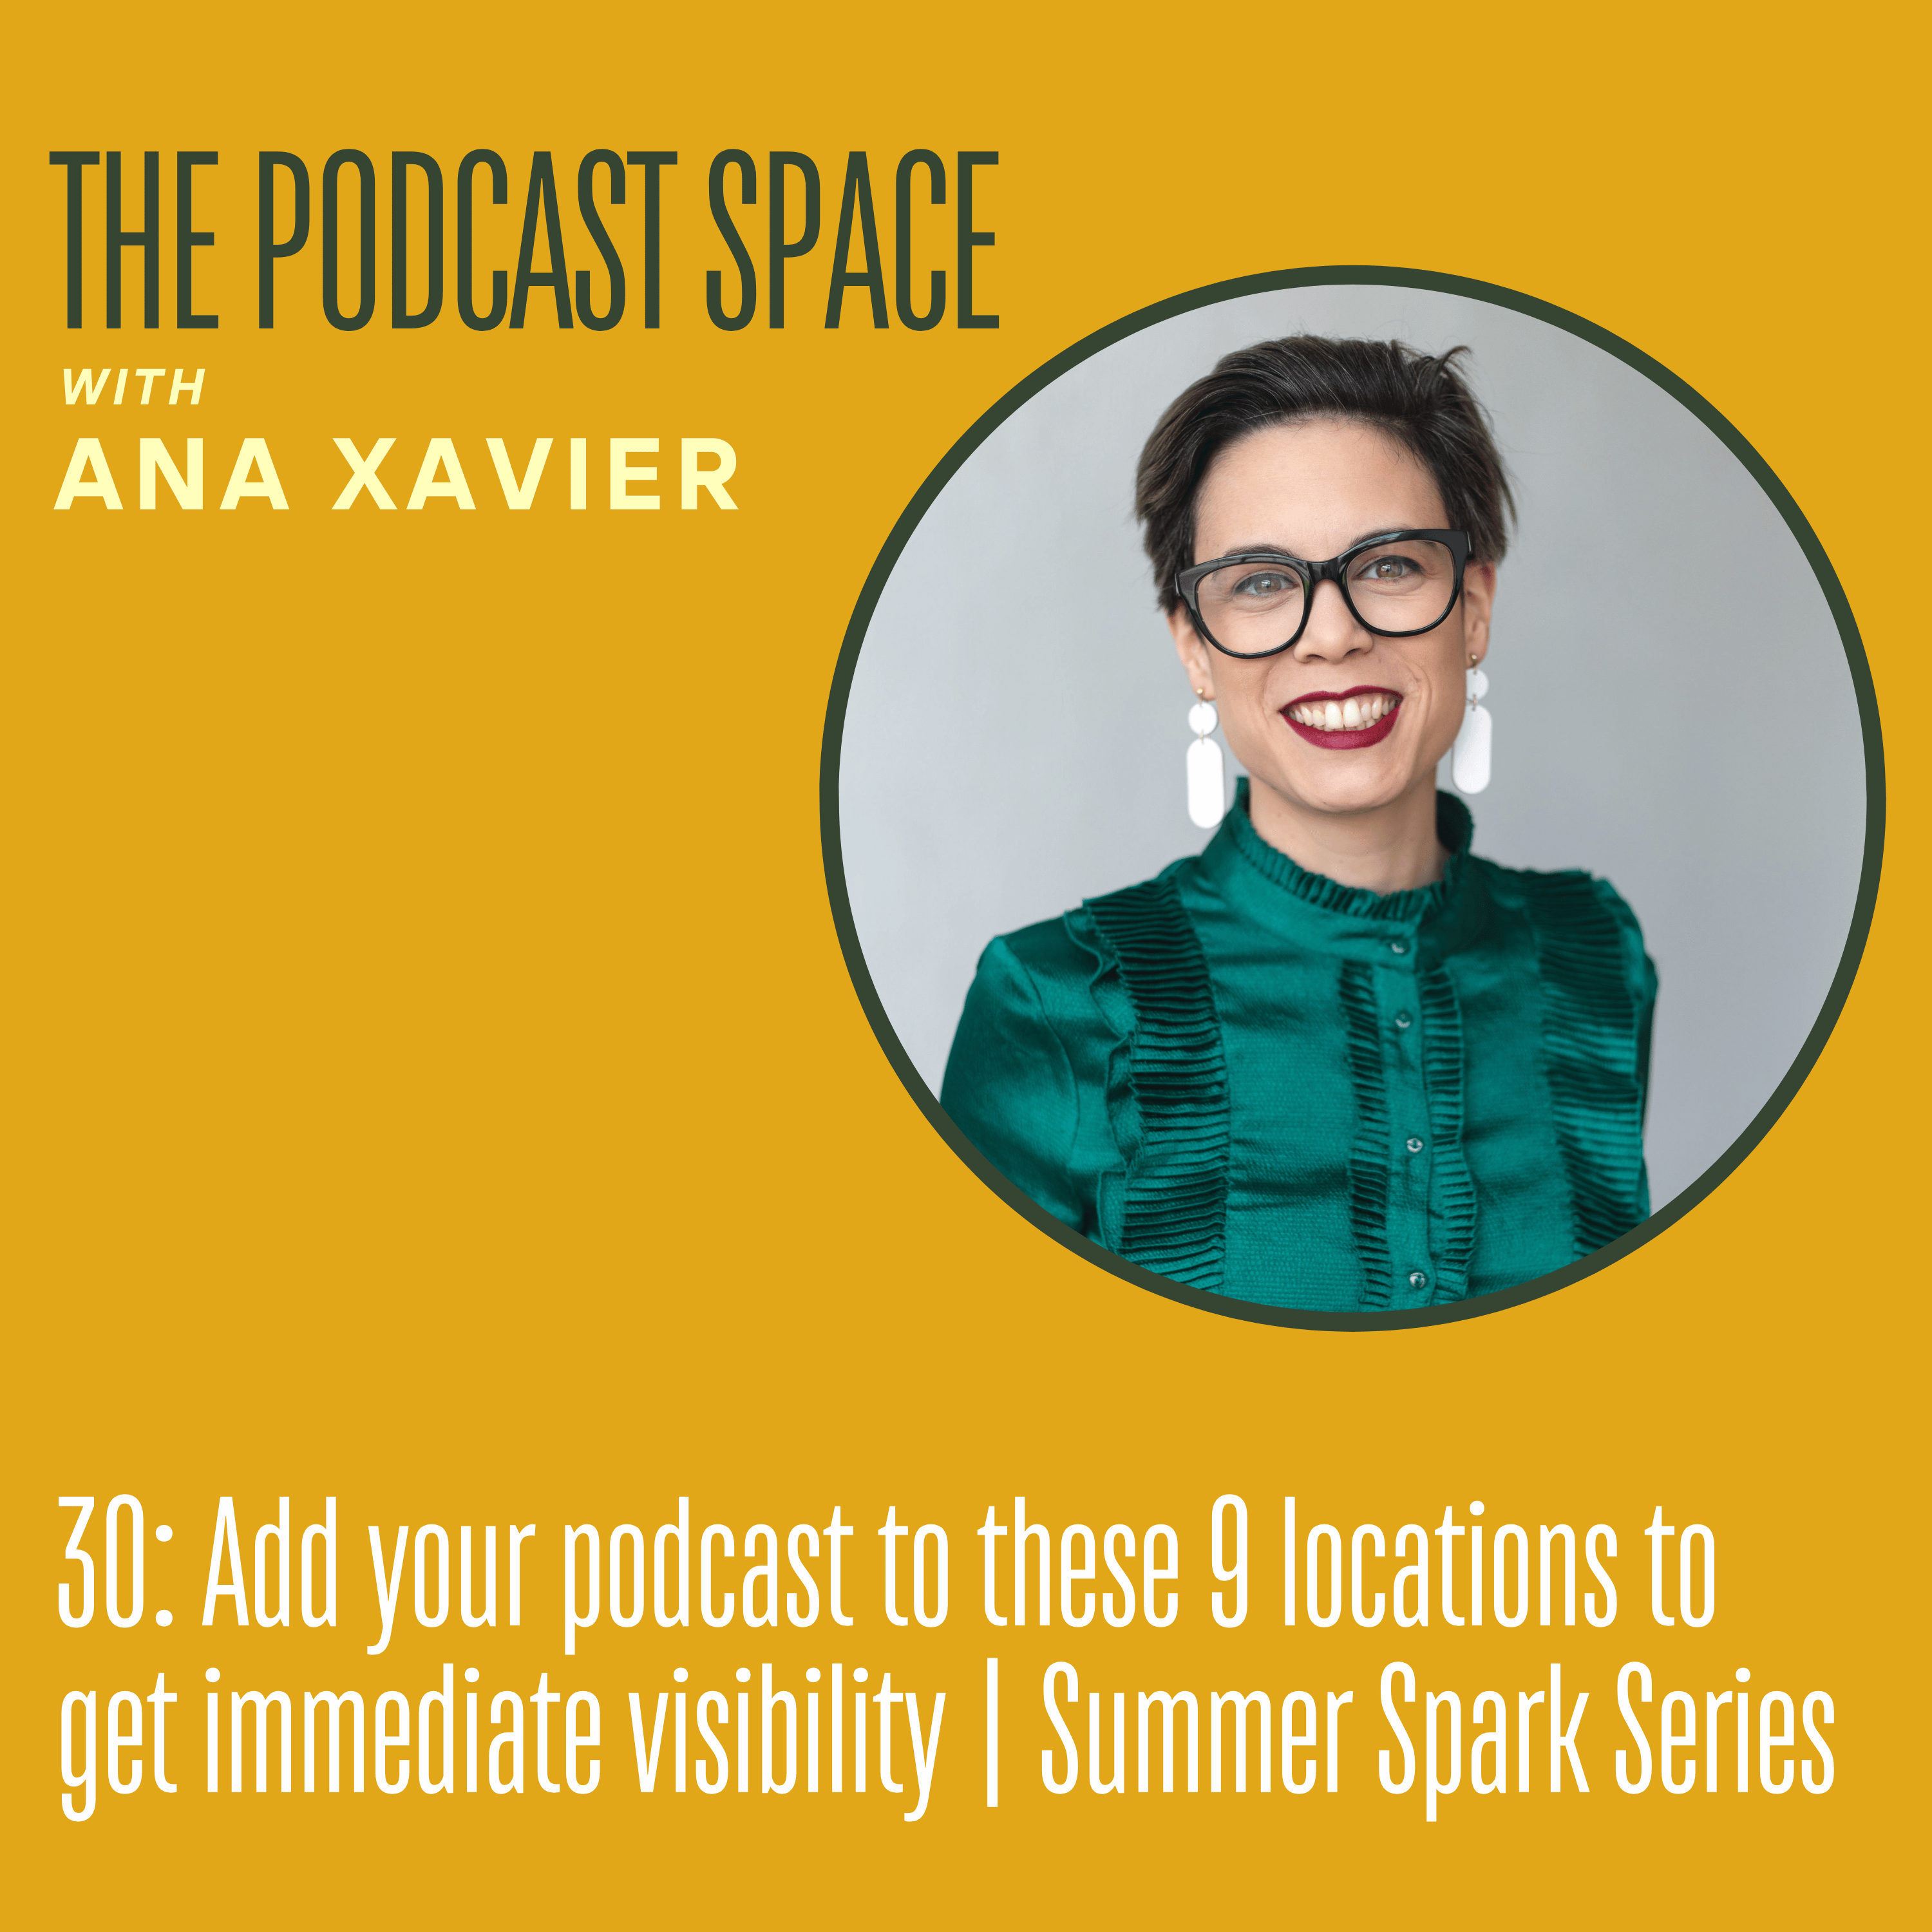 30. These 9 locations will get your podcast immediate visibility: Summer Spark Series